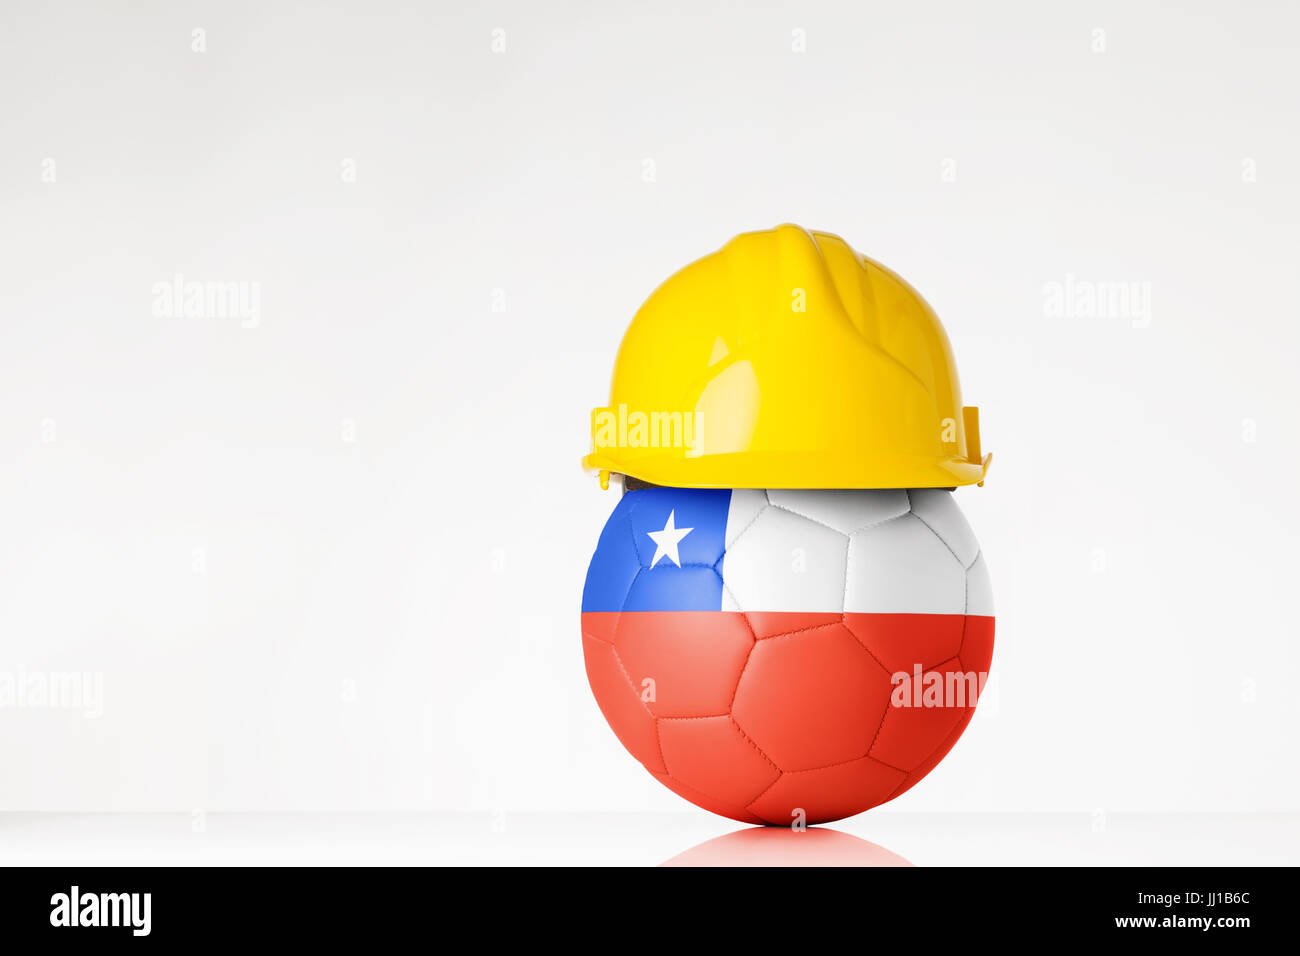 still life image of football wearing a hard hat with the Chile flag  superimposed on the football Stock Photo